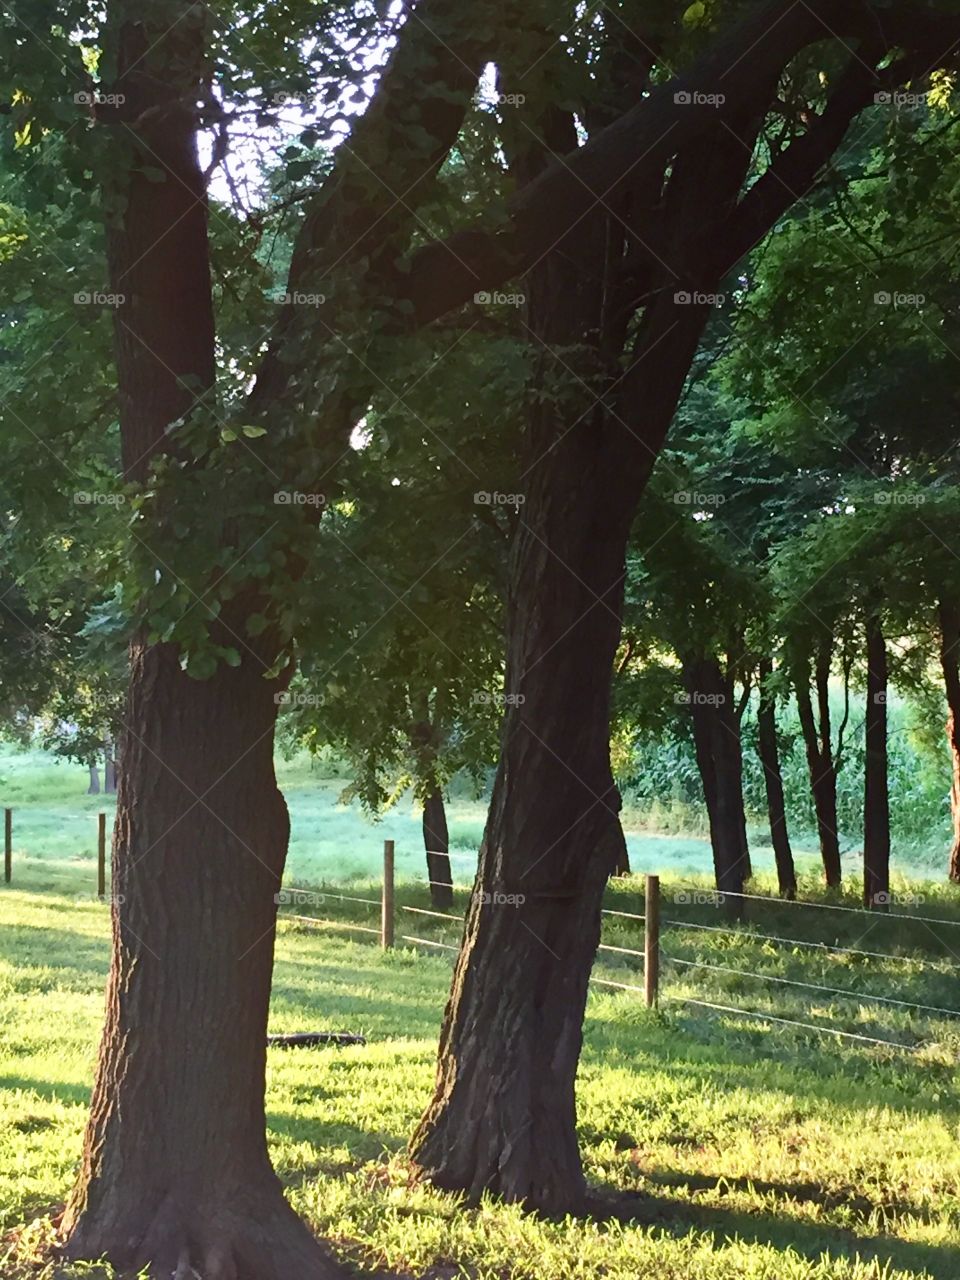 Sunlight illuminating the grass under a cool, shady grove of trees in a rural setting